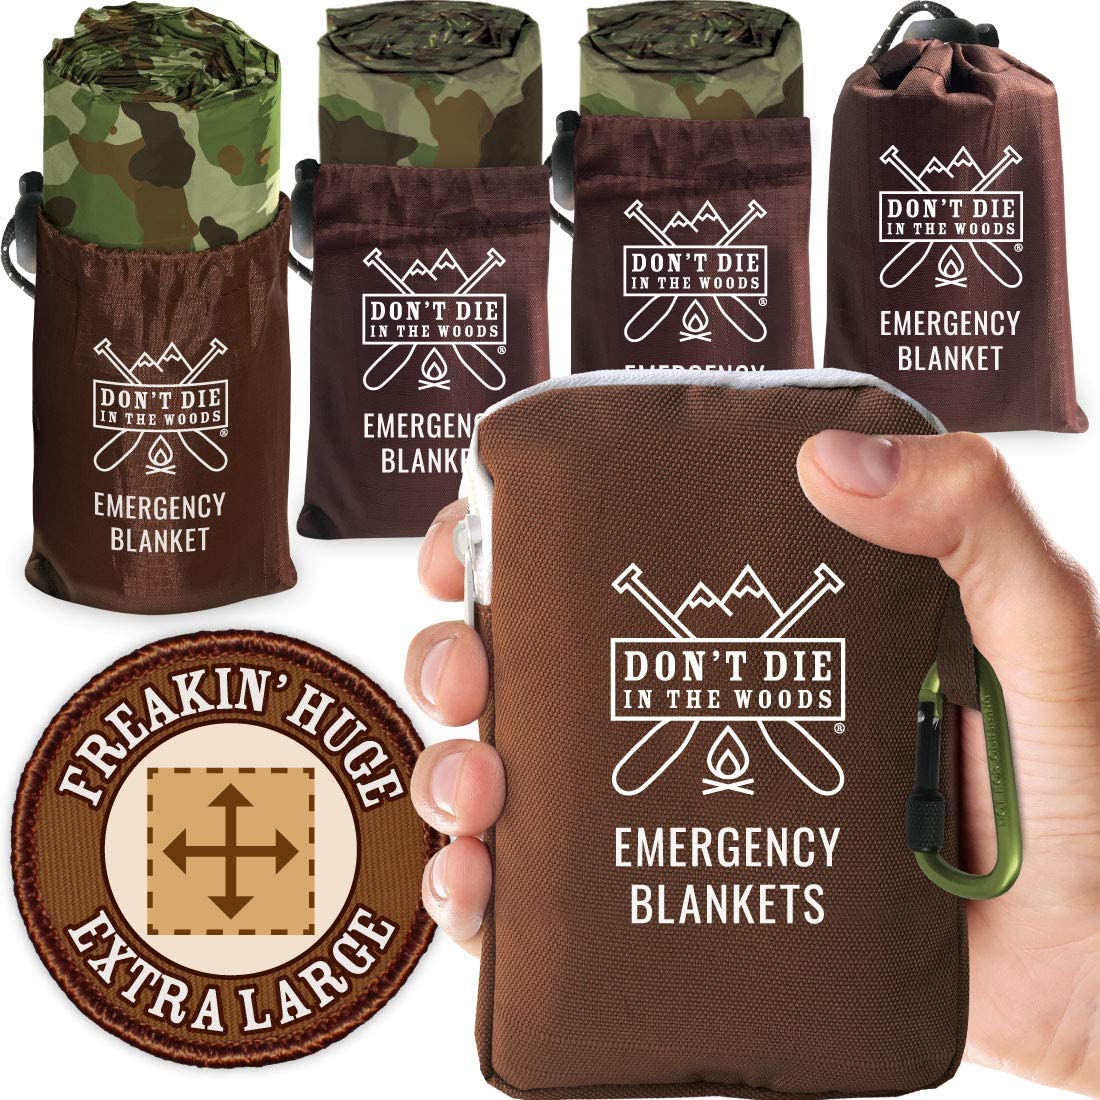 Don’t Die In The Woods – Freakin’ Huge Emergency Blankets [4-Pack] Extra-Large Thermal Mylar Space Blankets with Ripstop Nylon Stuff Sacks + Carabiner Zipper Pack [Woodland Camo]